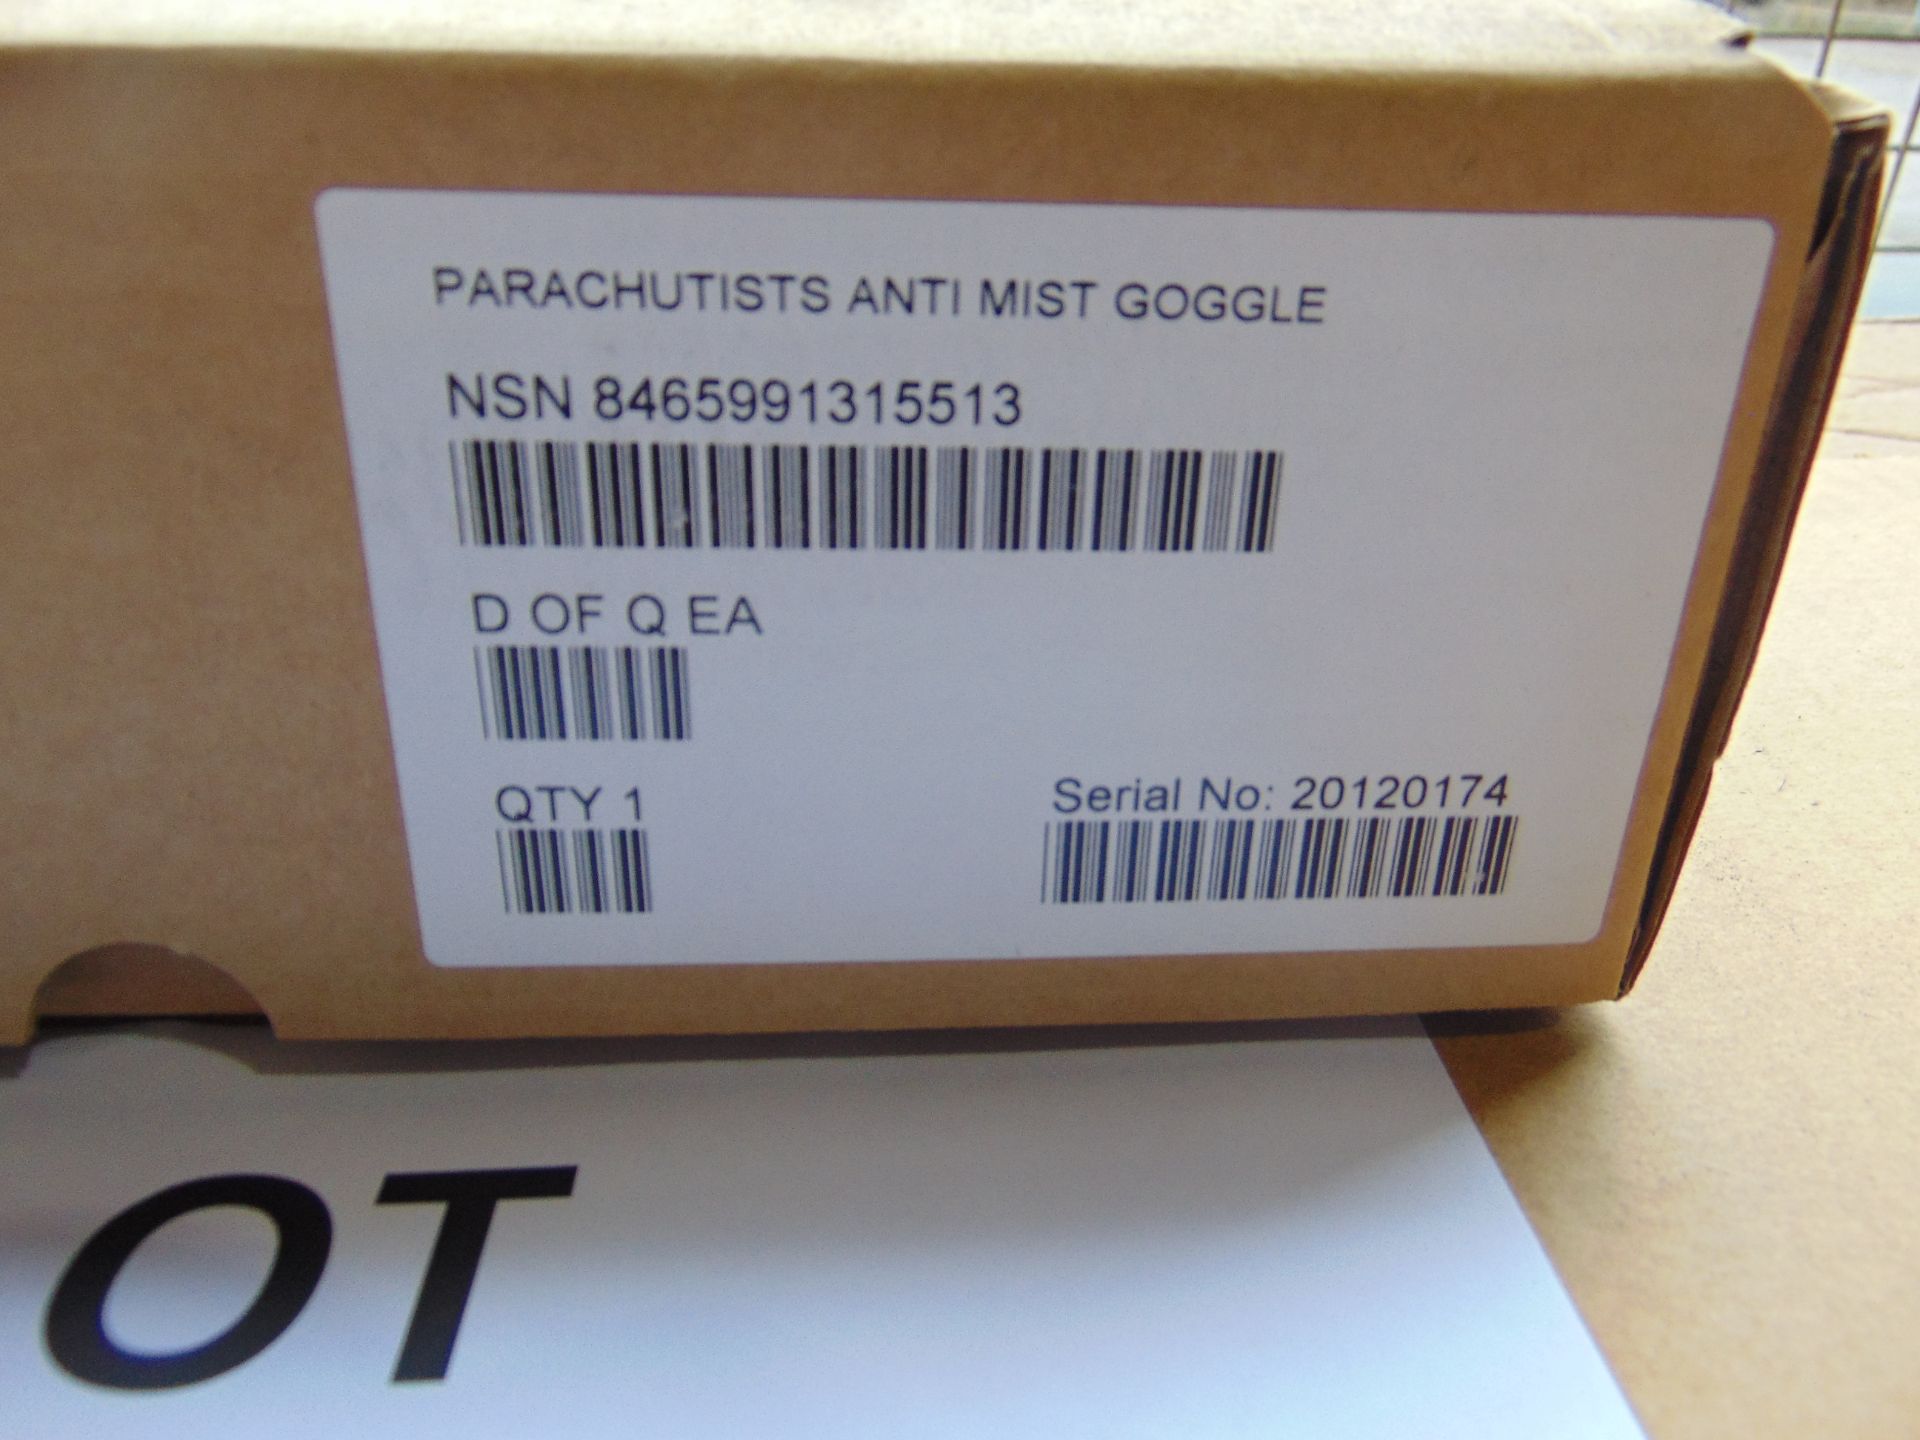 NEW UNISSUED CAM LOCK PARACHUTISTS ANTI MIST GOGGLES . USED BY SAS NATO NUMBERS DATE 2012 - Image 5 of 7